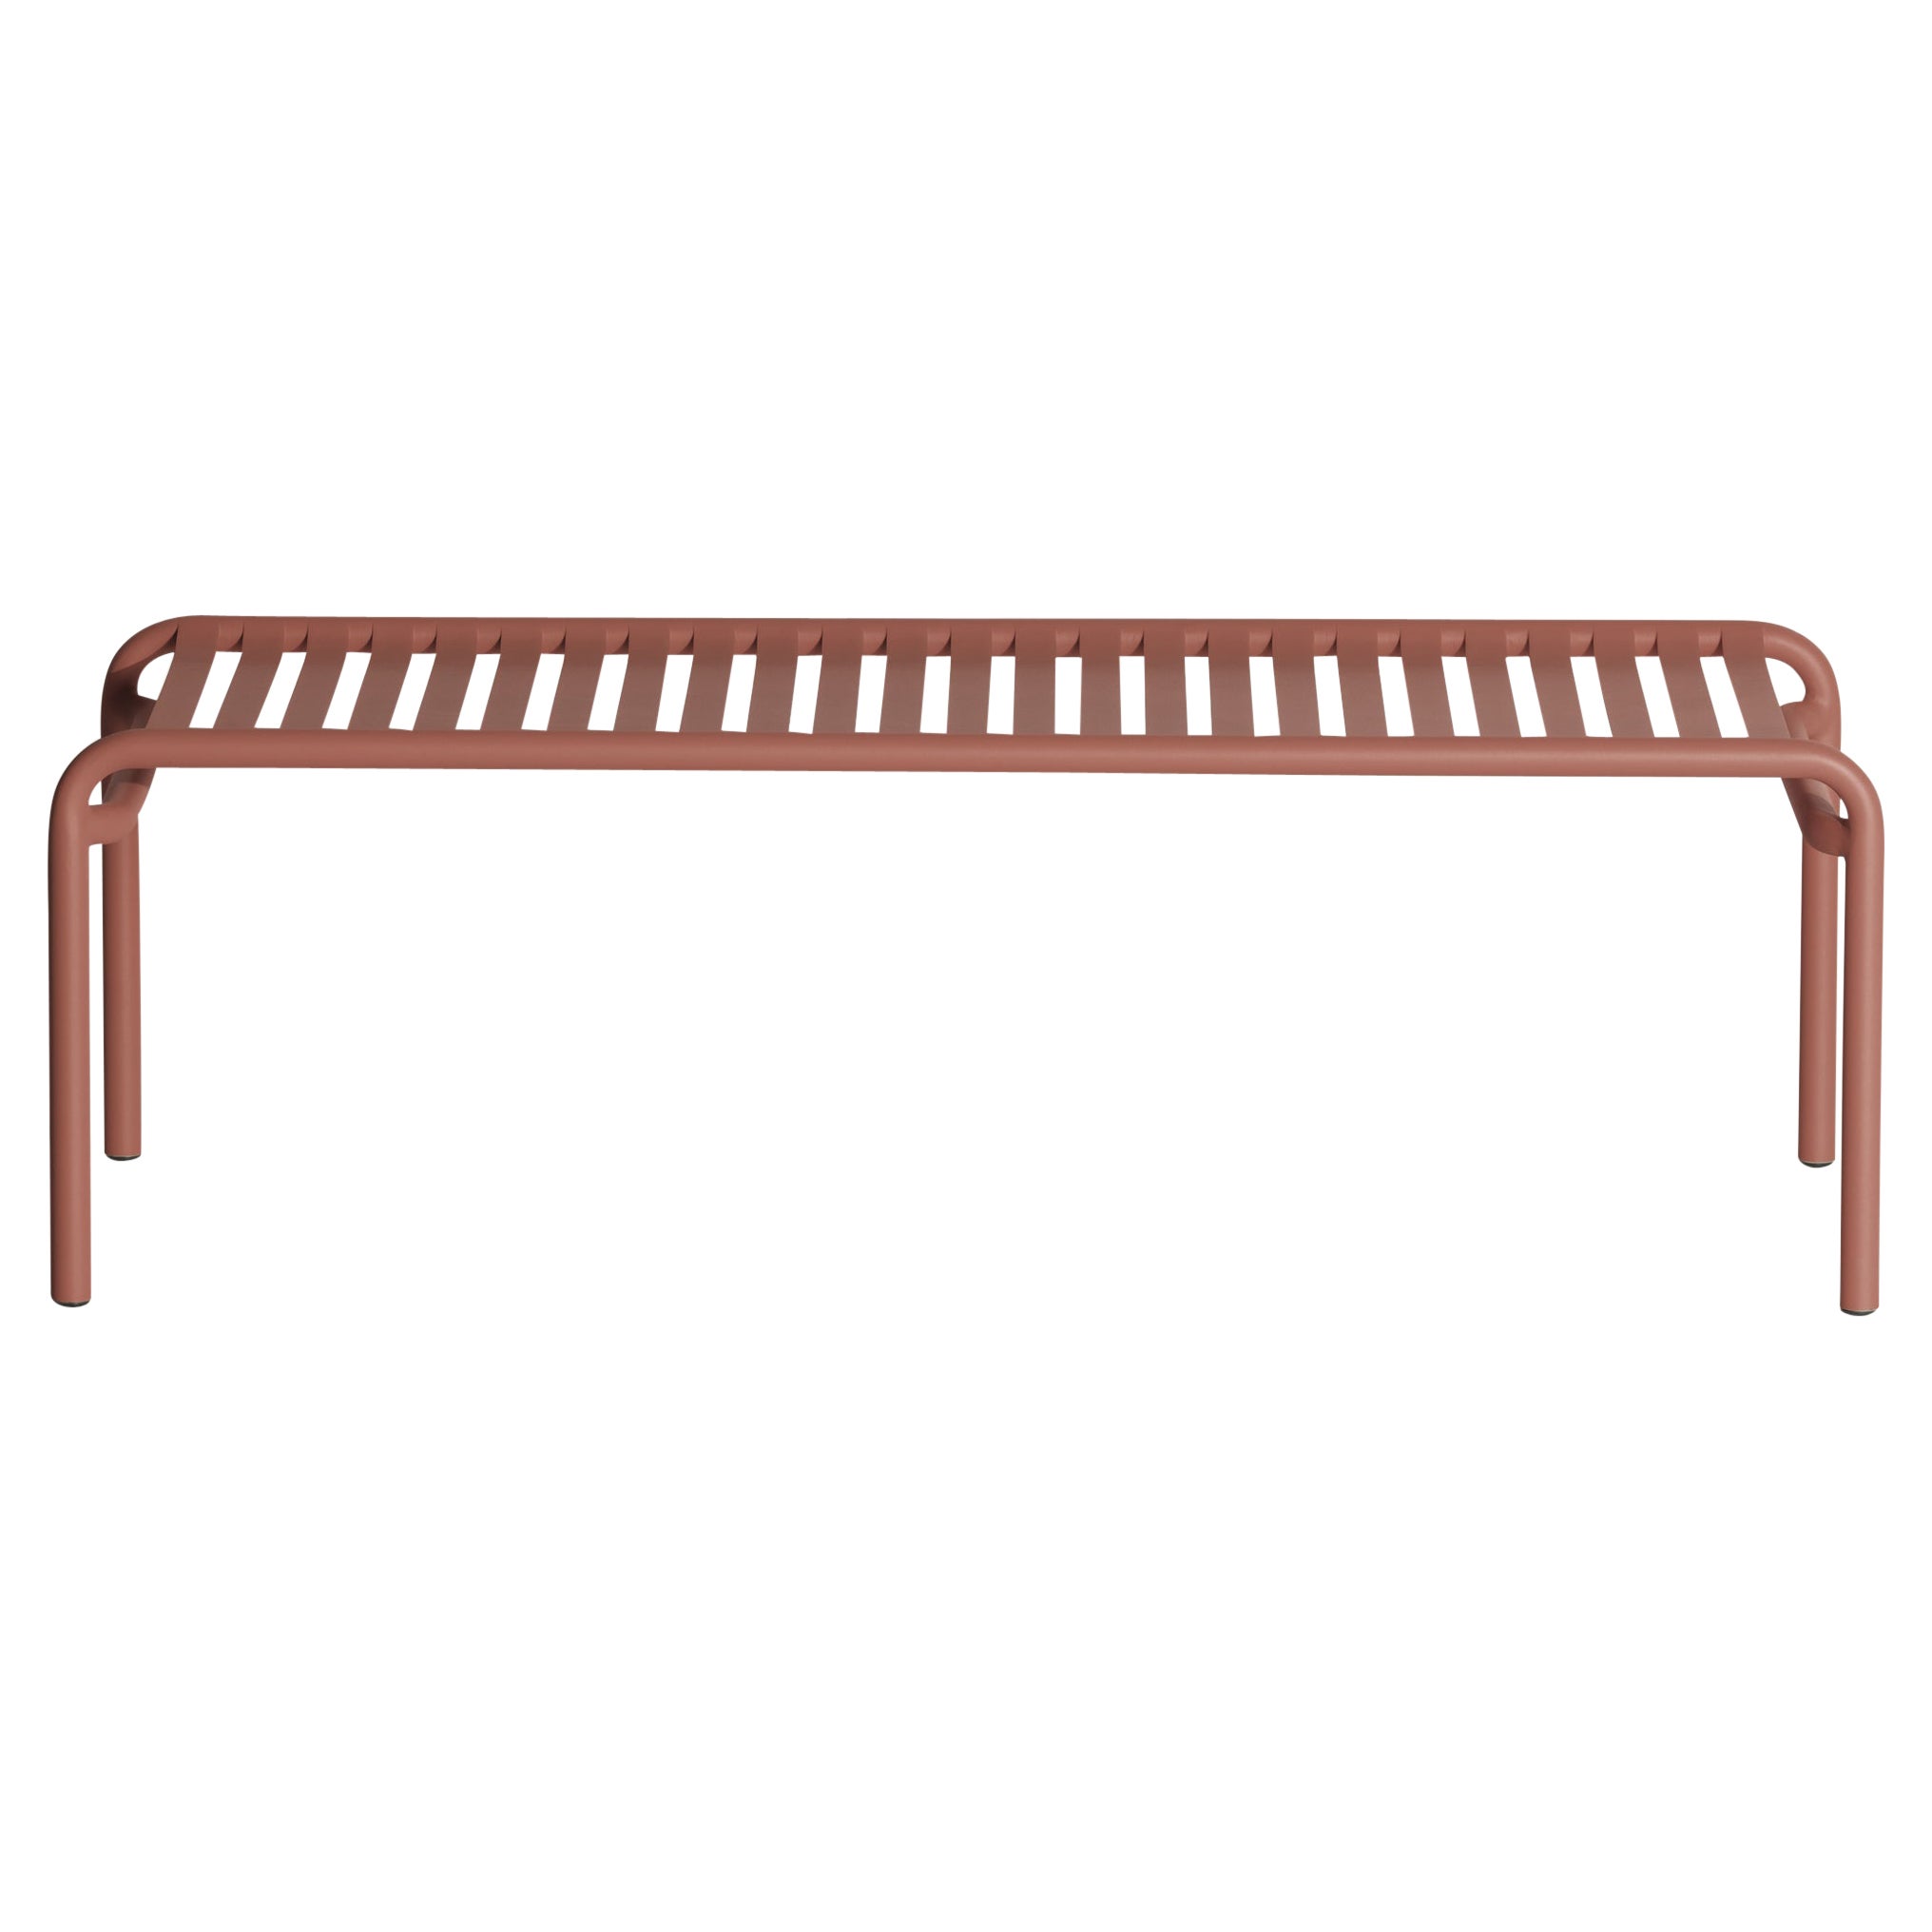 Petite Friture Week-End Long Coffee Table in Terracotta Aluminium, 2017 For Sale